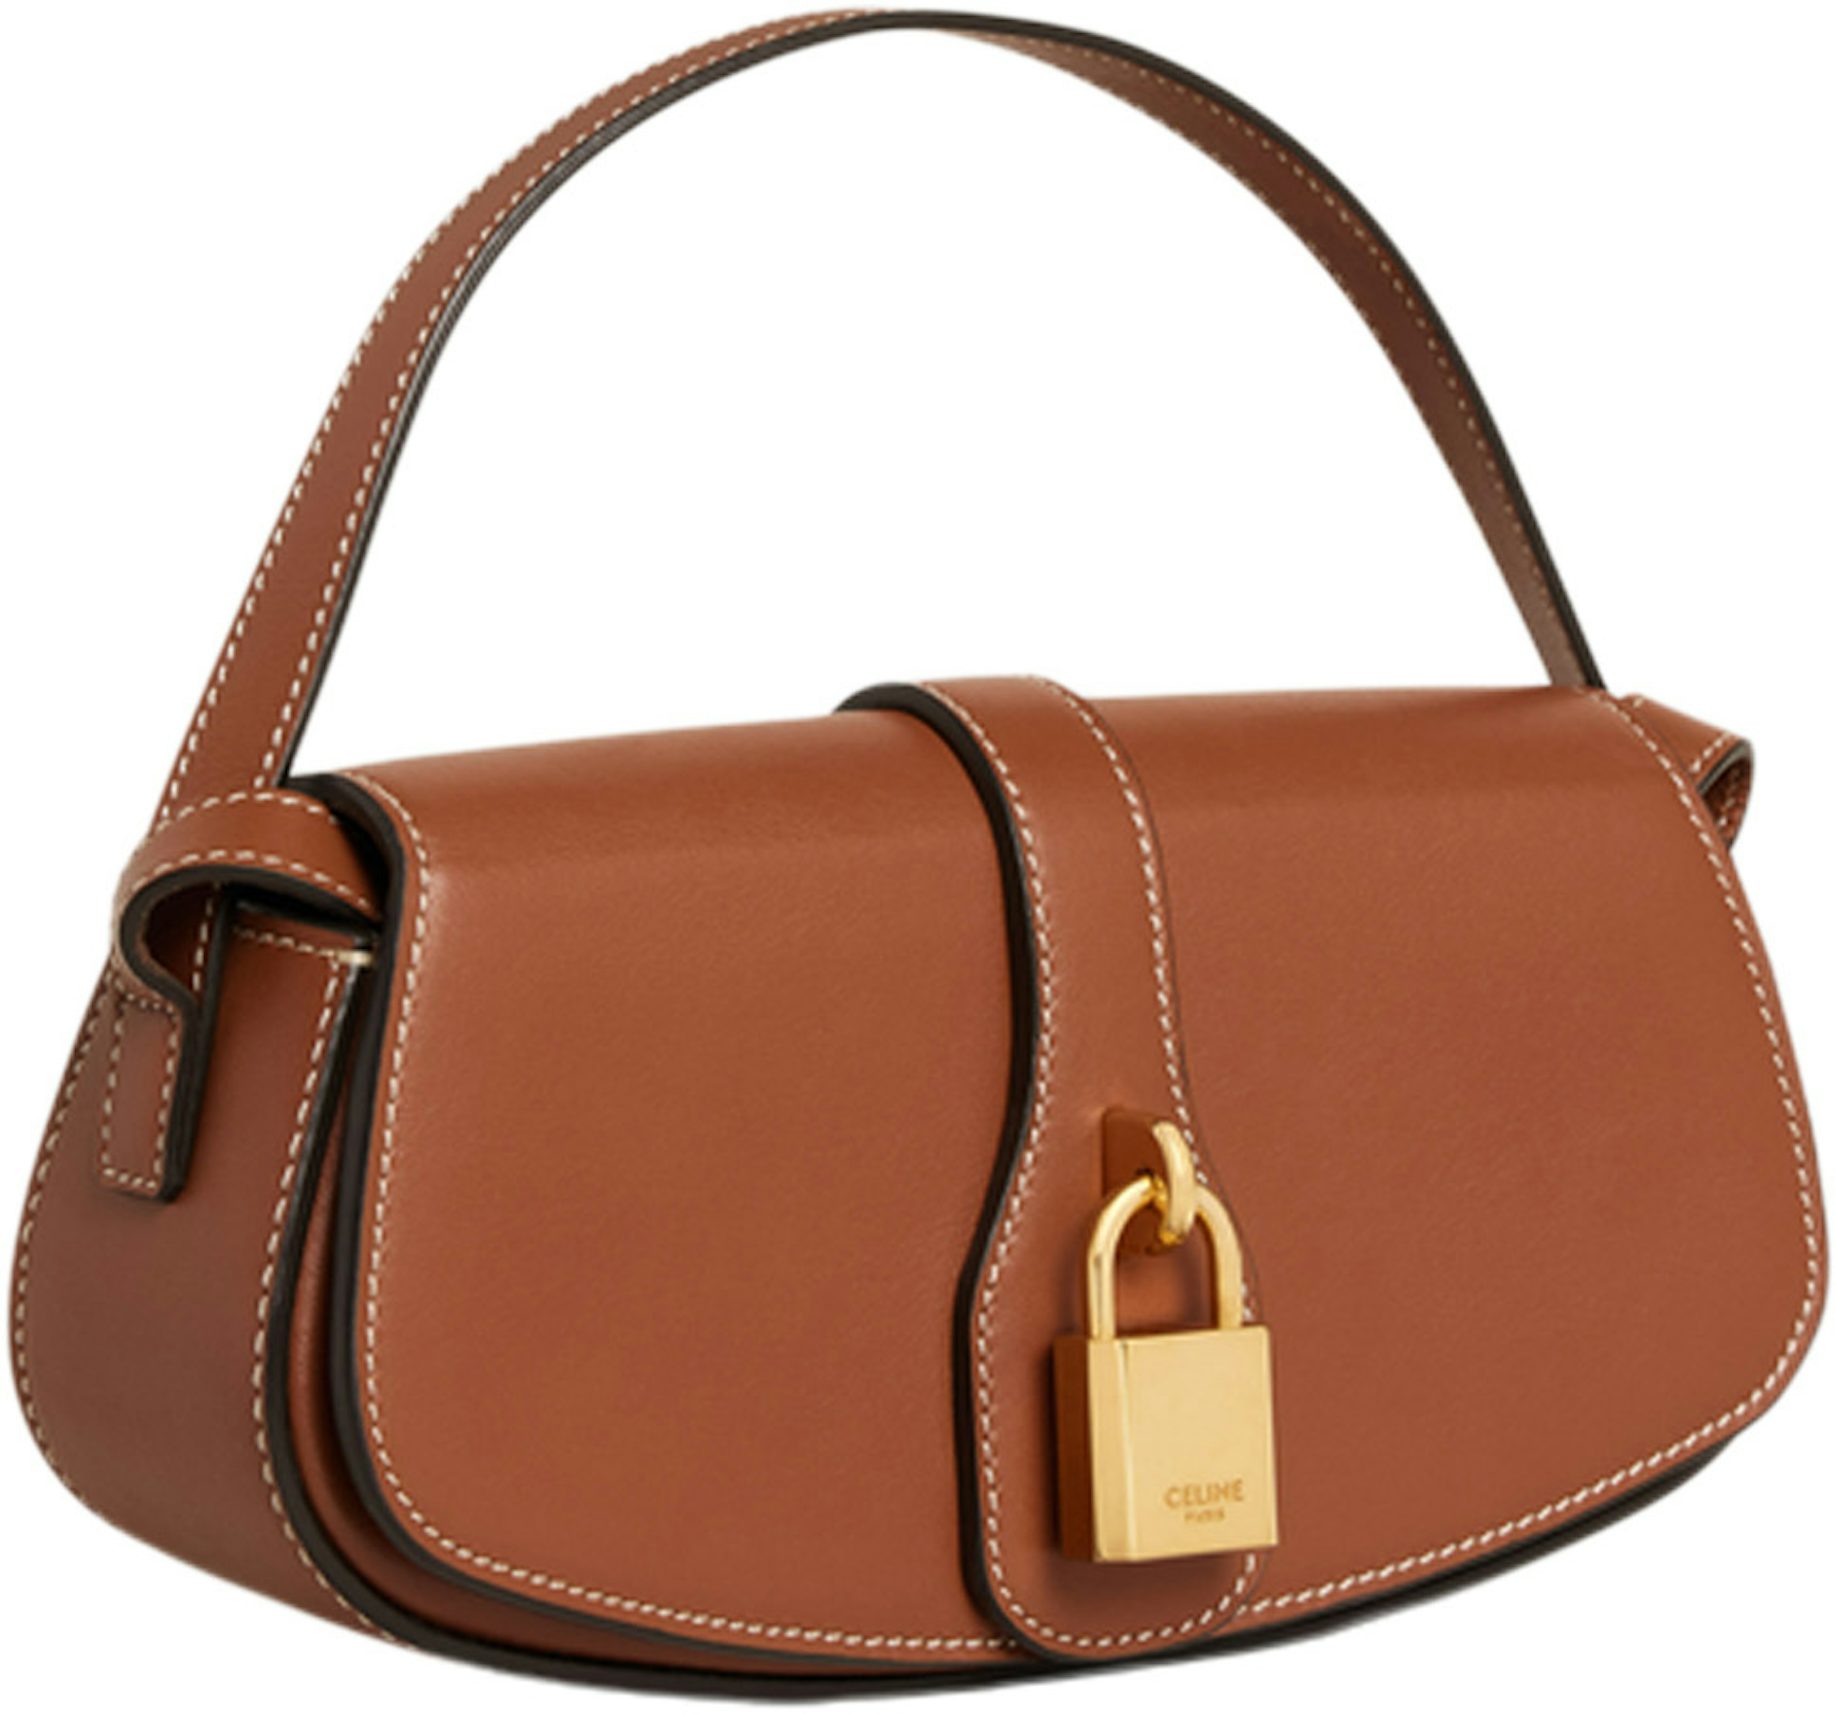 CLUTCH ON STRAP TABOU in Smooth calfskin